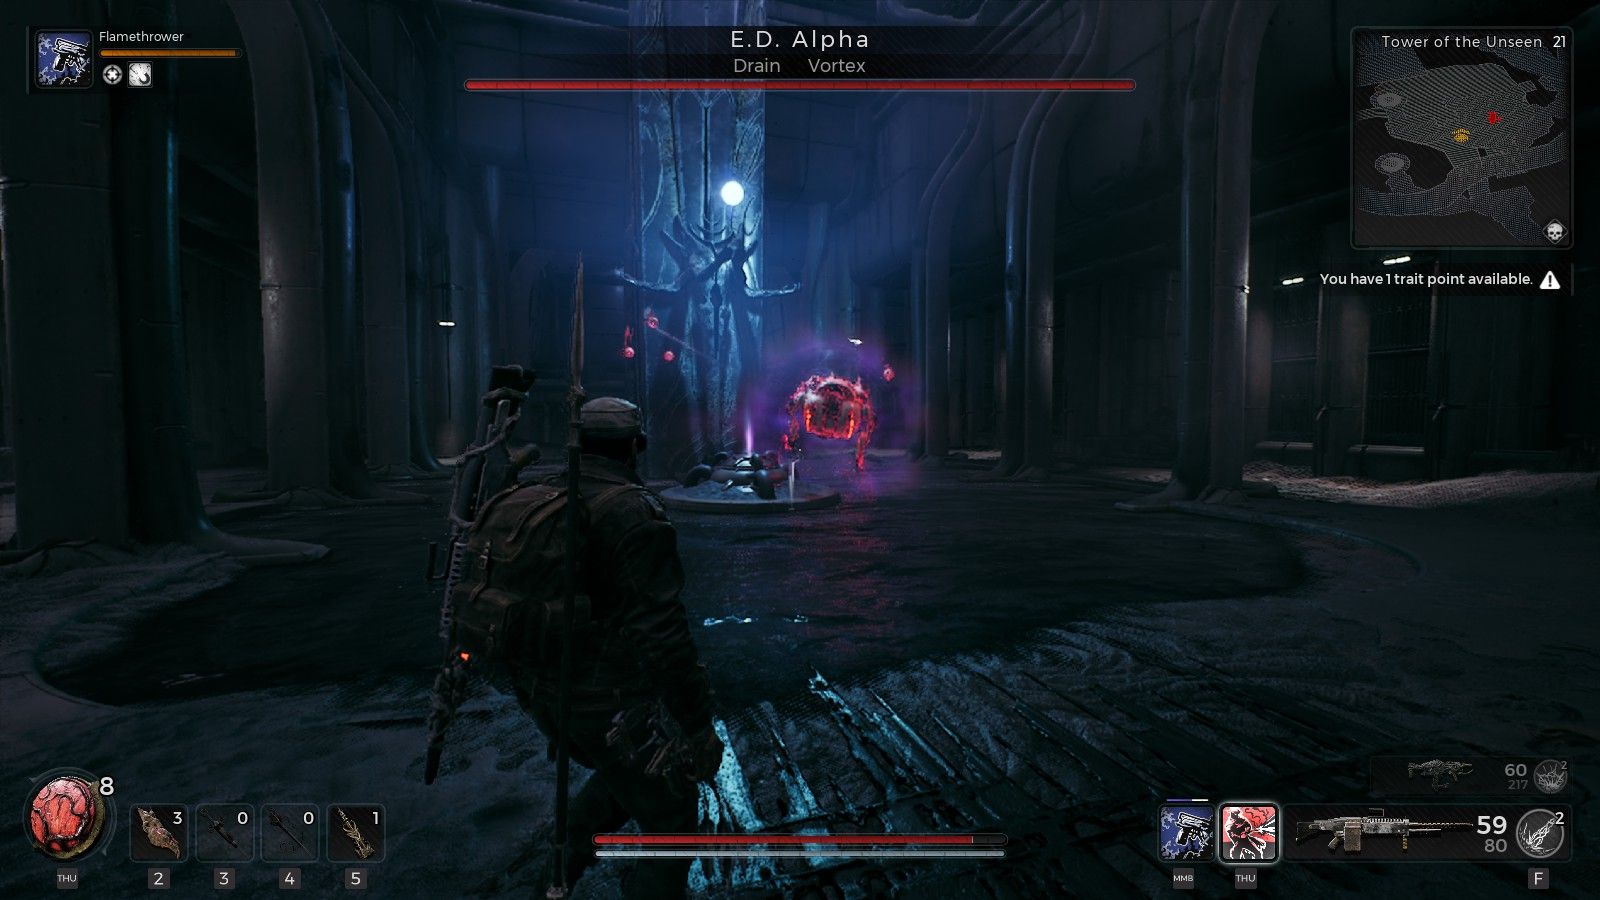 Remnant 2: E.D. Alpha In Its Boss Room In The Unseen Tower